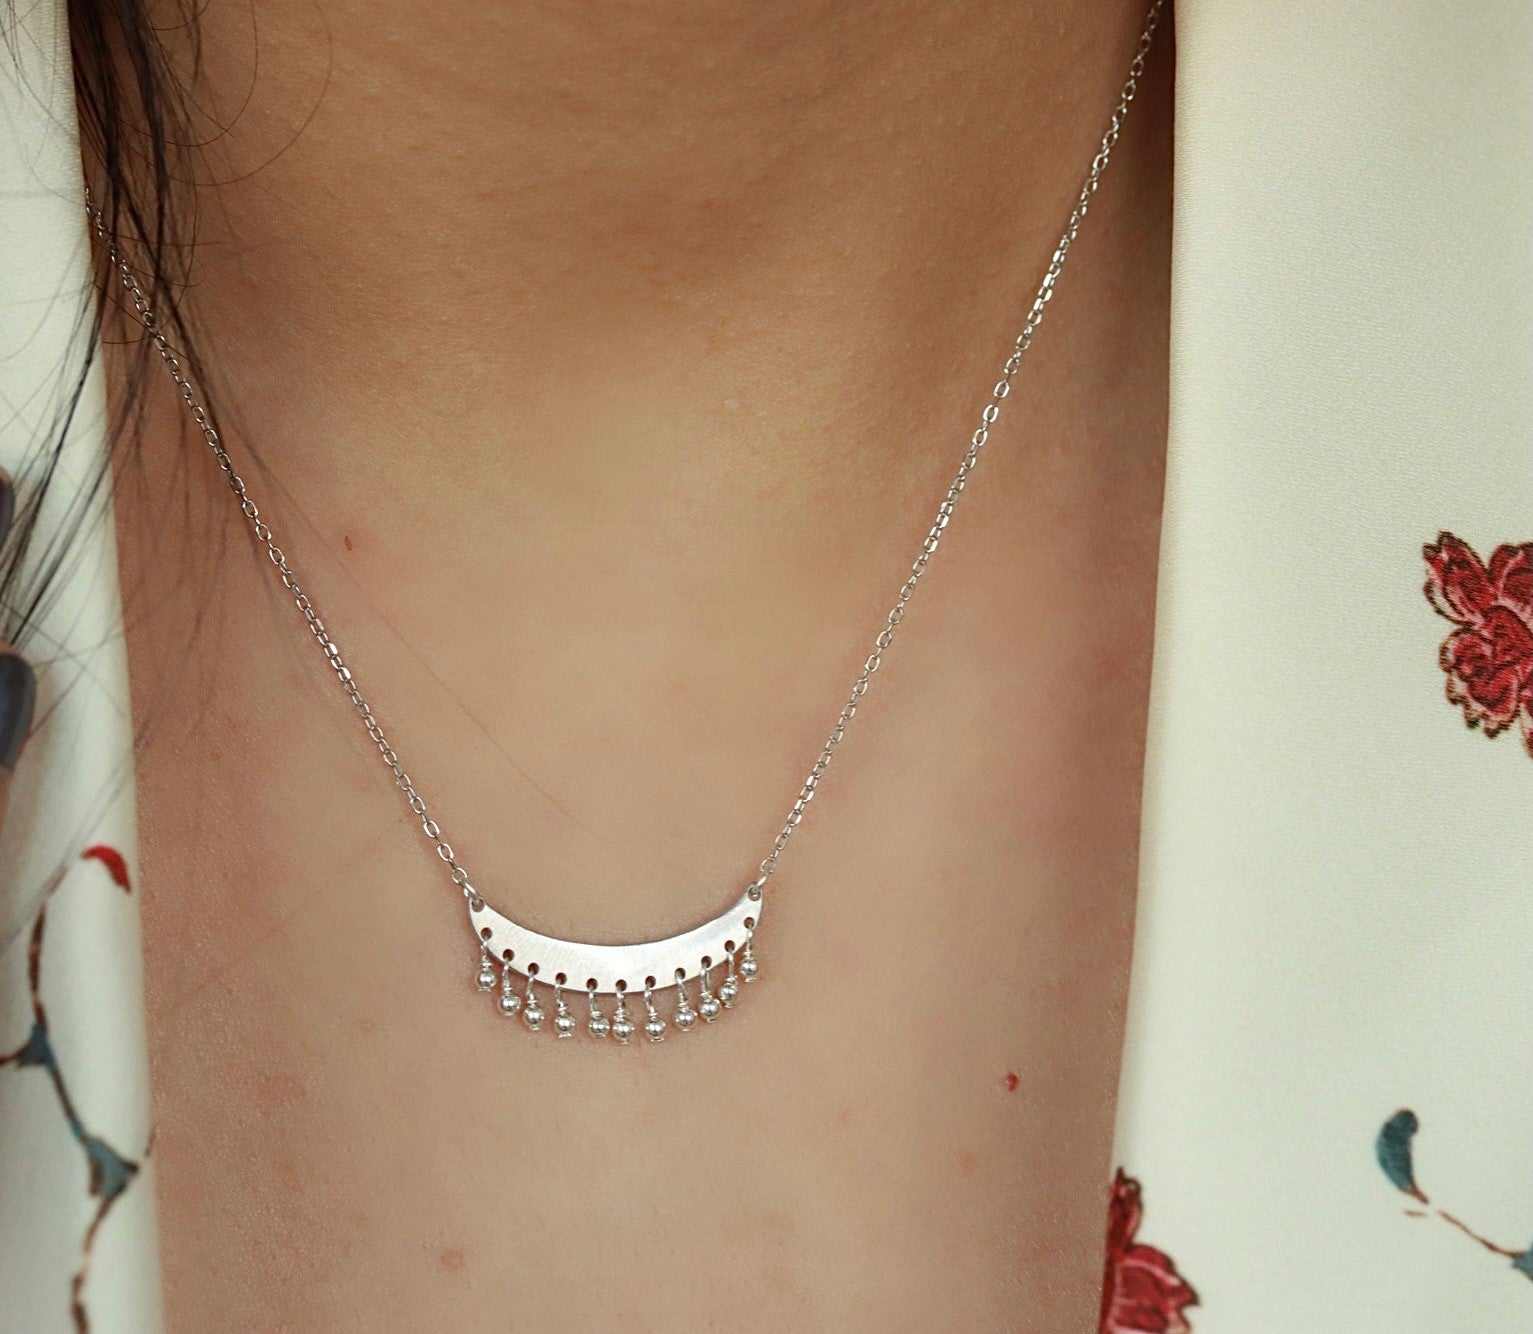 Dangling silver beads moon necklace